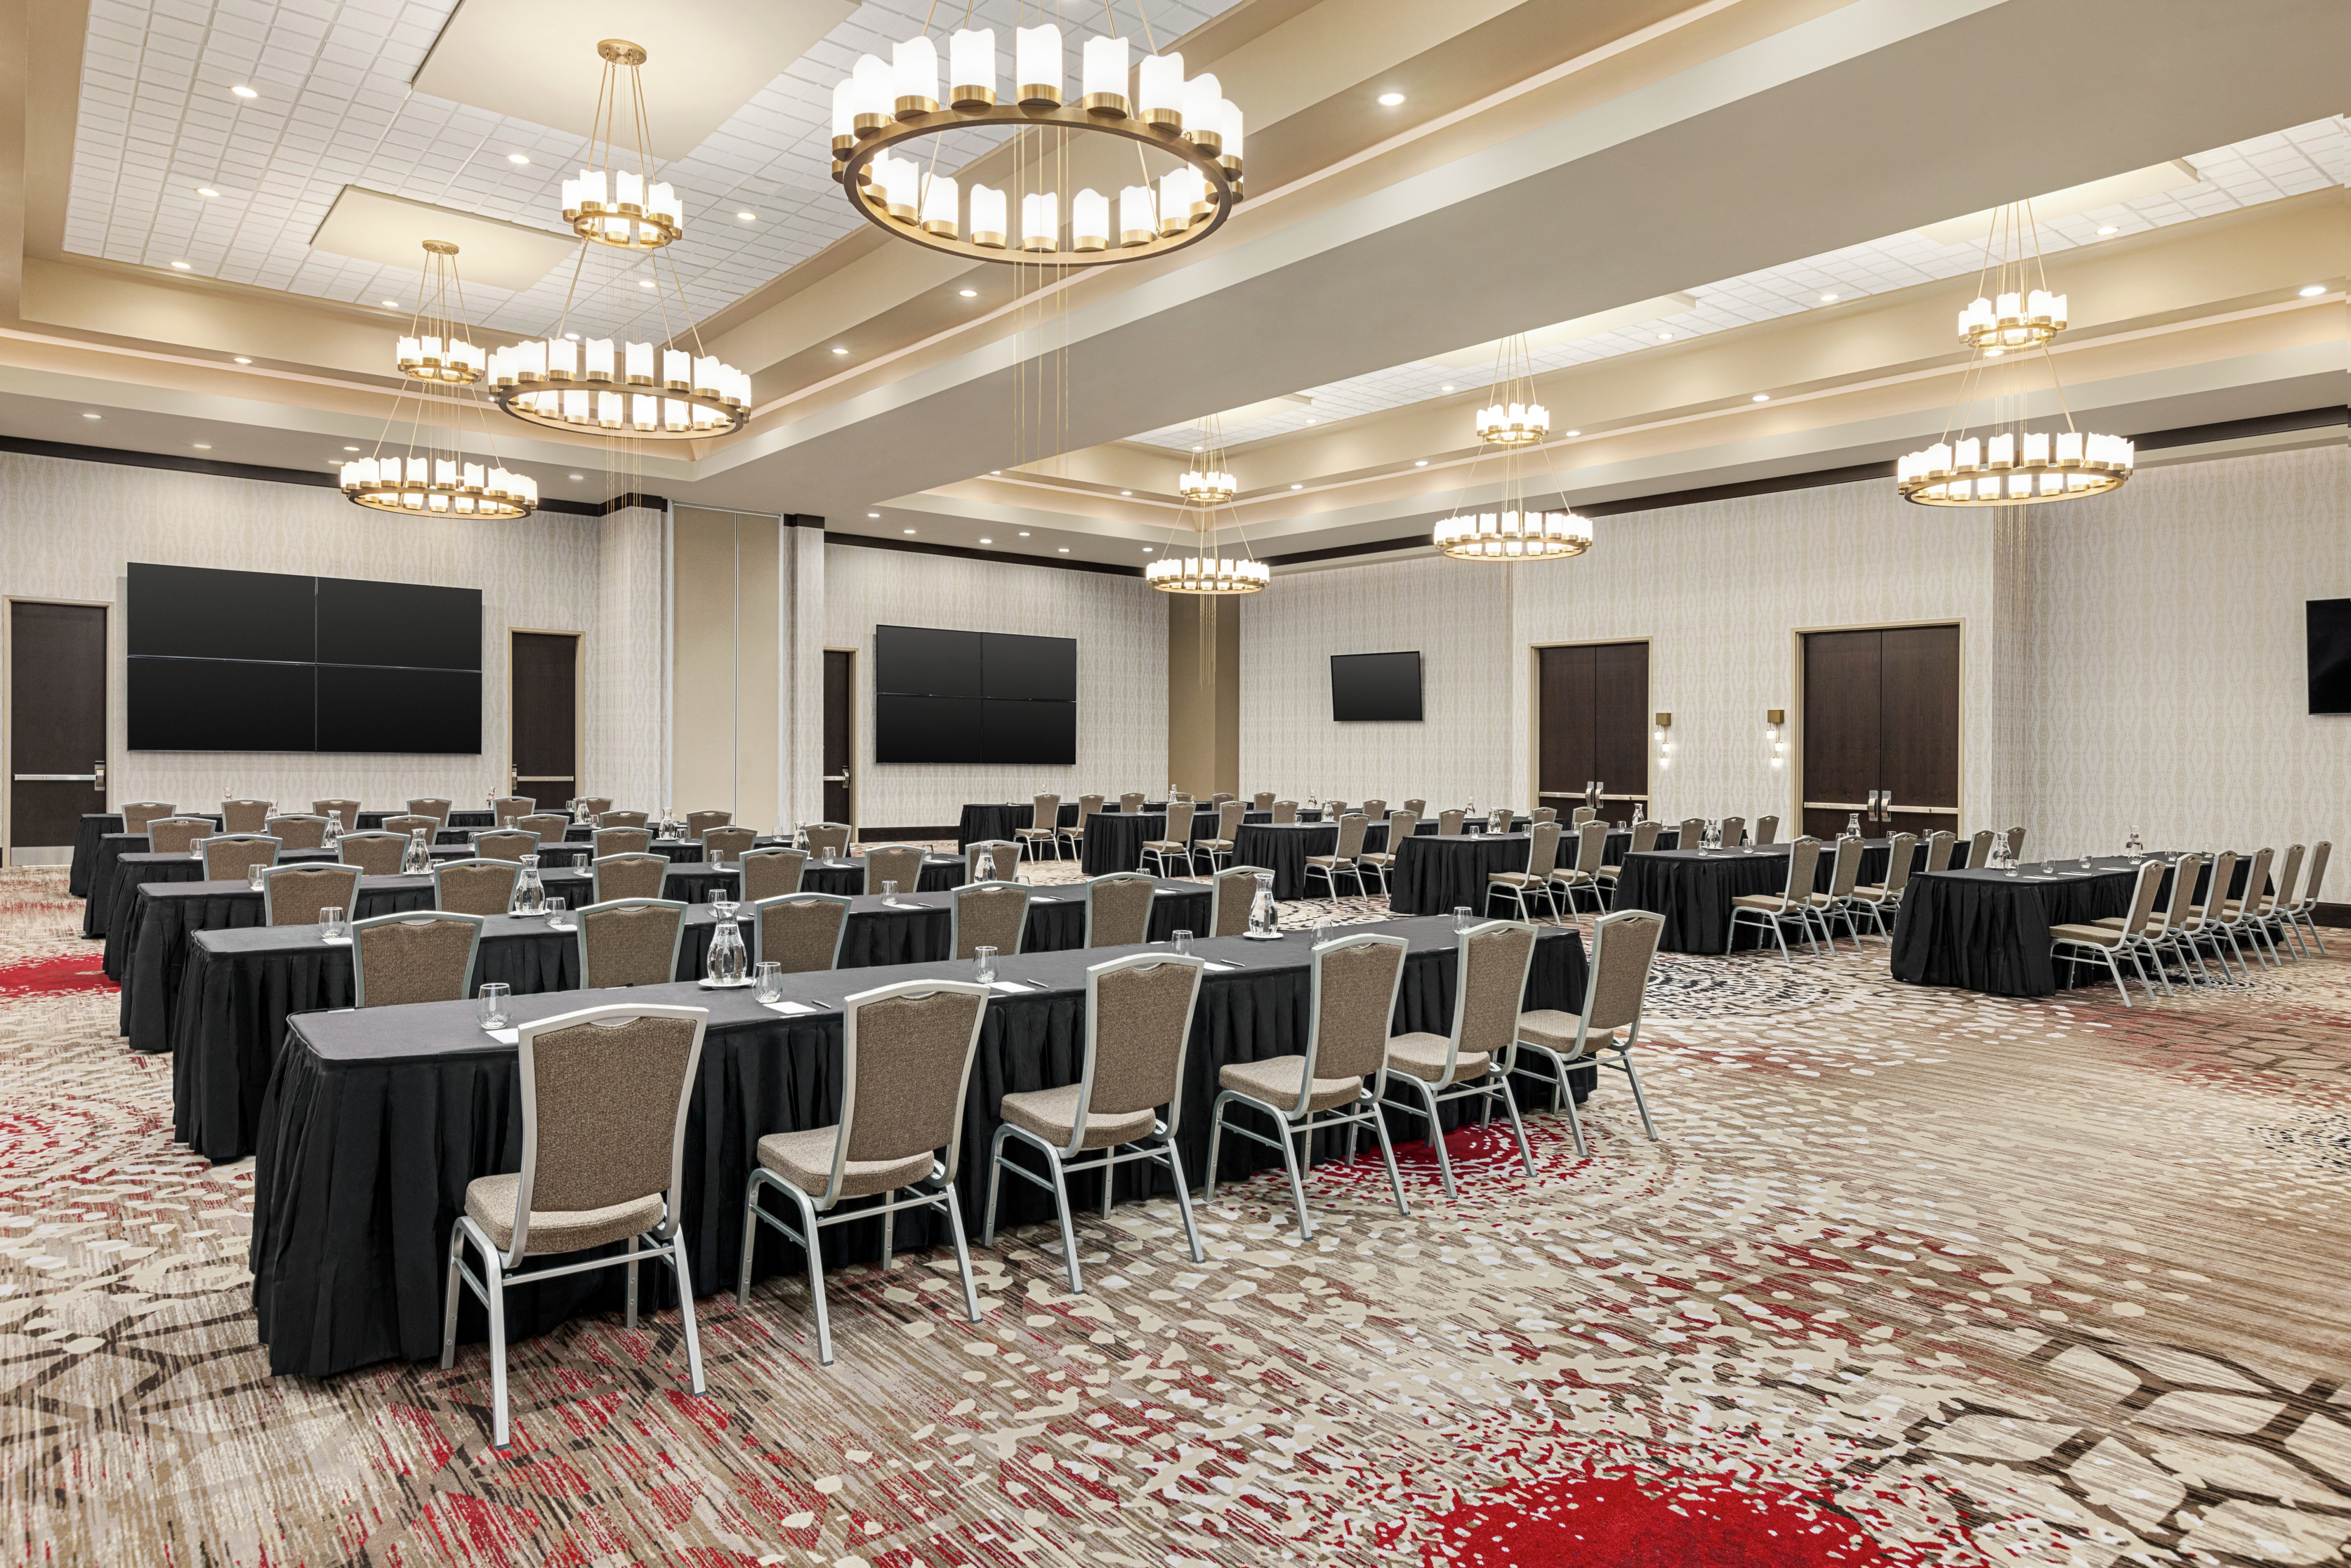 Spacious meeting room featuring a classroom style setup with ample seating and large TVs at front of room.